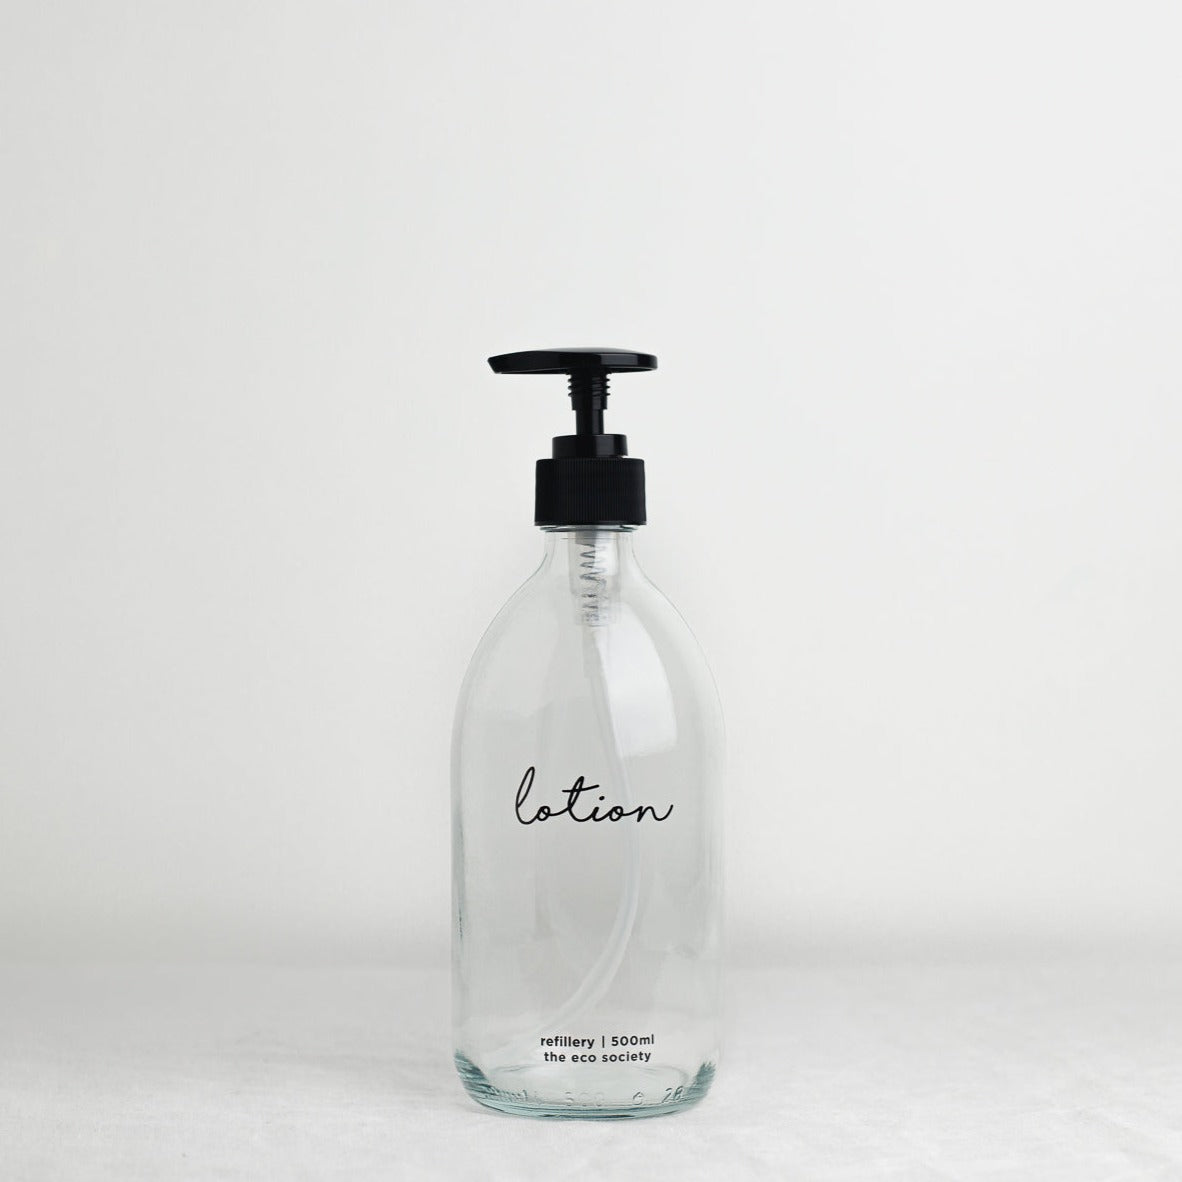 Clear Glass Bottle with Black printed text "Lotion" 500ml Refillery Bottle